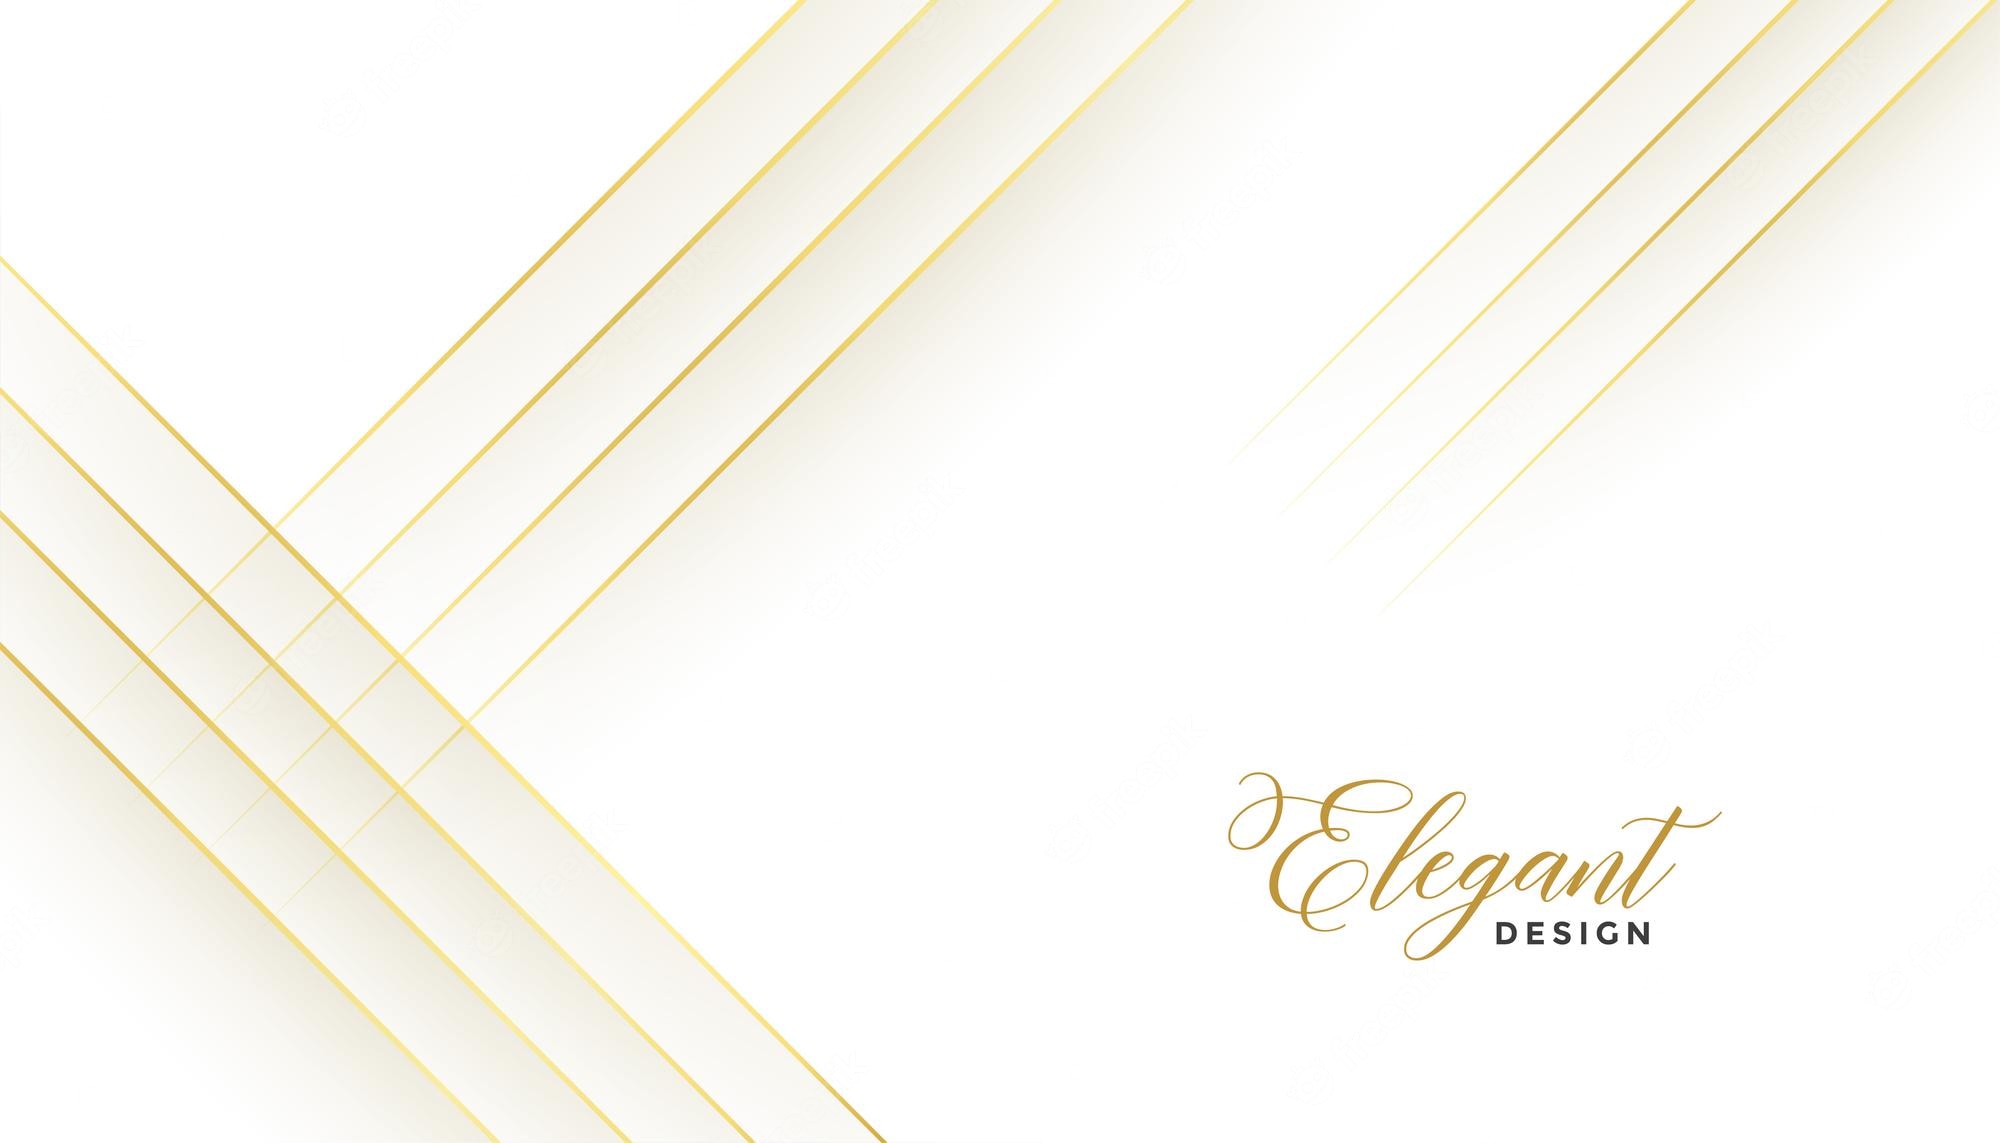 White And Gold Backgrounds